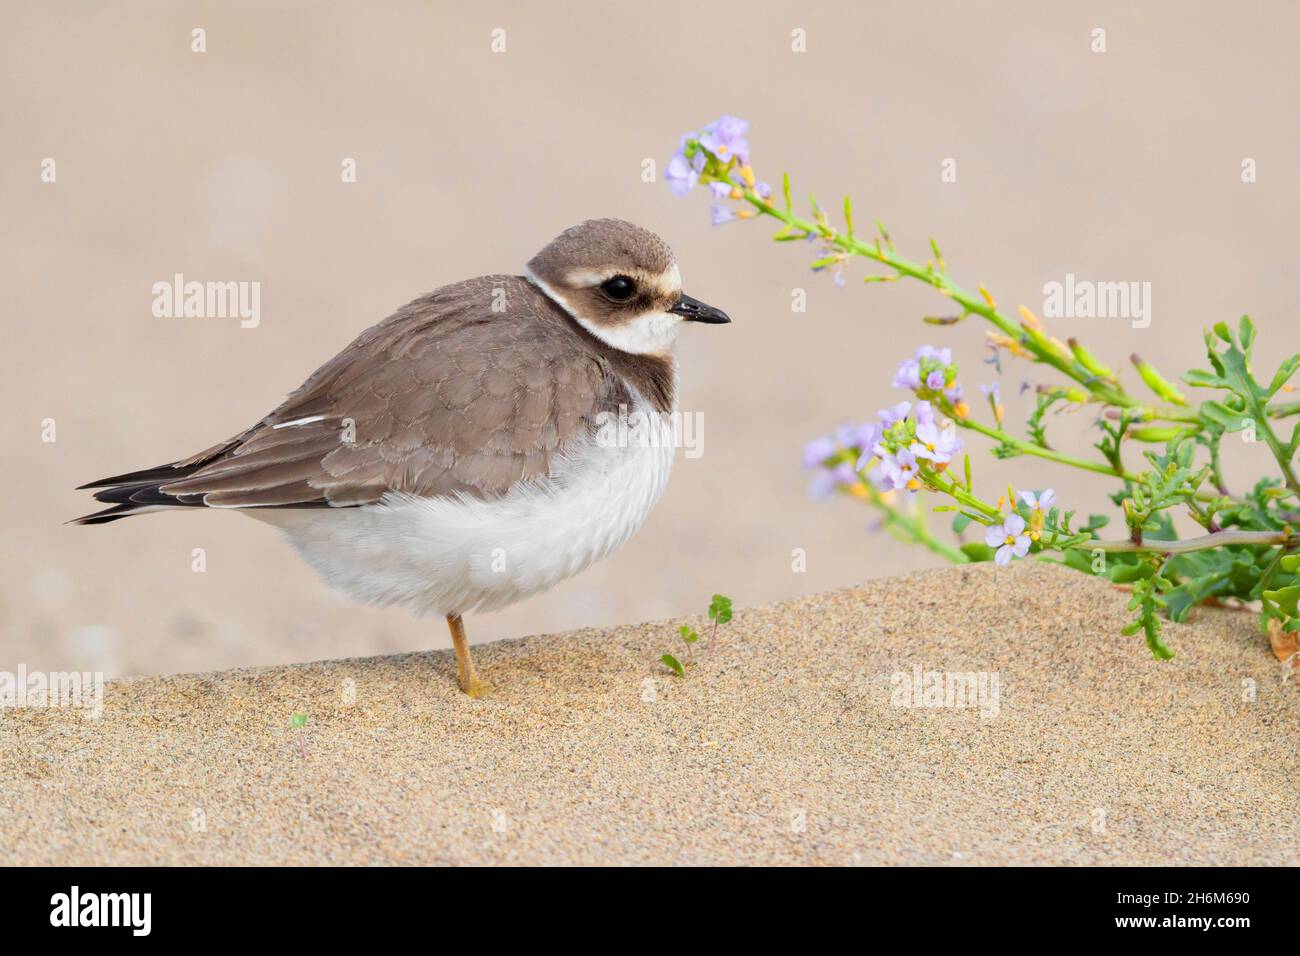 Ringed Plover (Charadrius hiaticula), side view of a juvenile standing close to a Sea Rocket (Cakile maritima), Campania, Italy Stock Photo